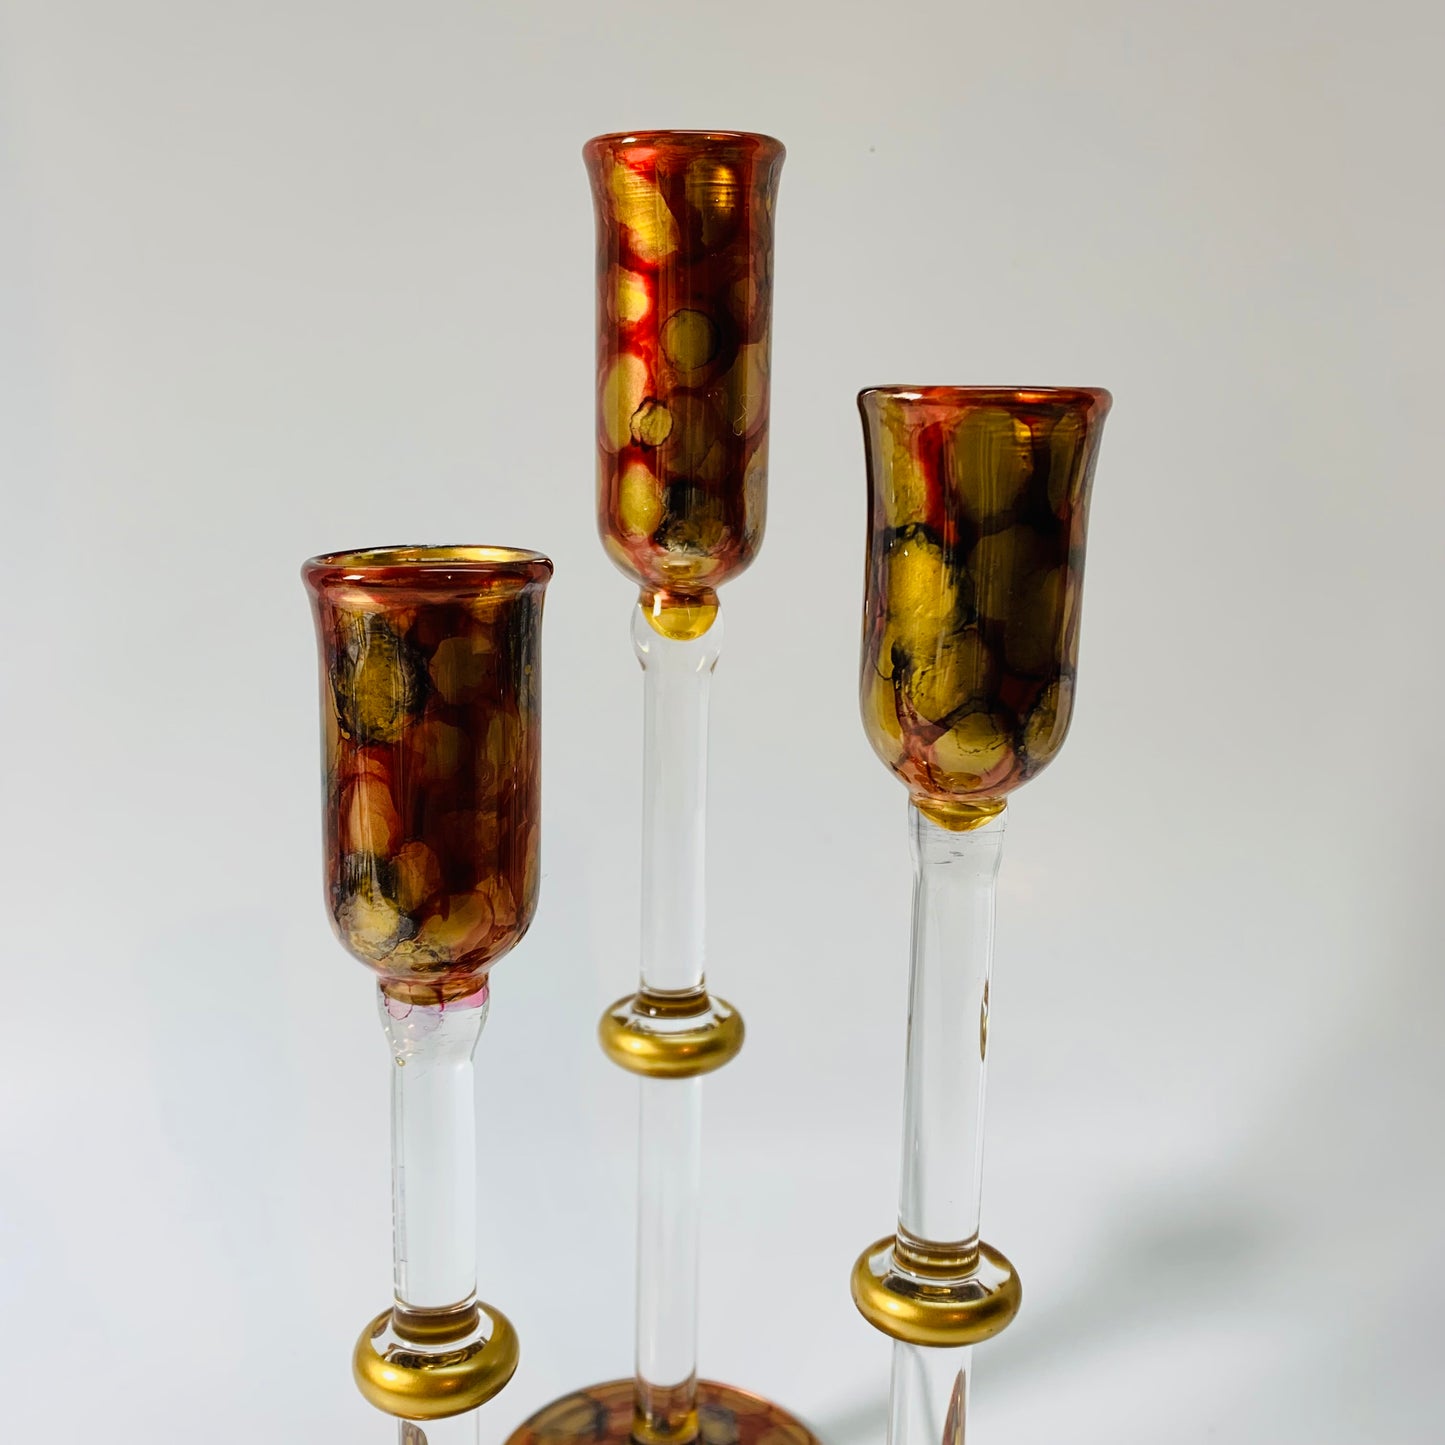 Long Stem Blown Glass Candle Holder - Tulip Gold, Red & Green